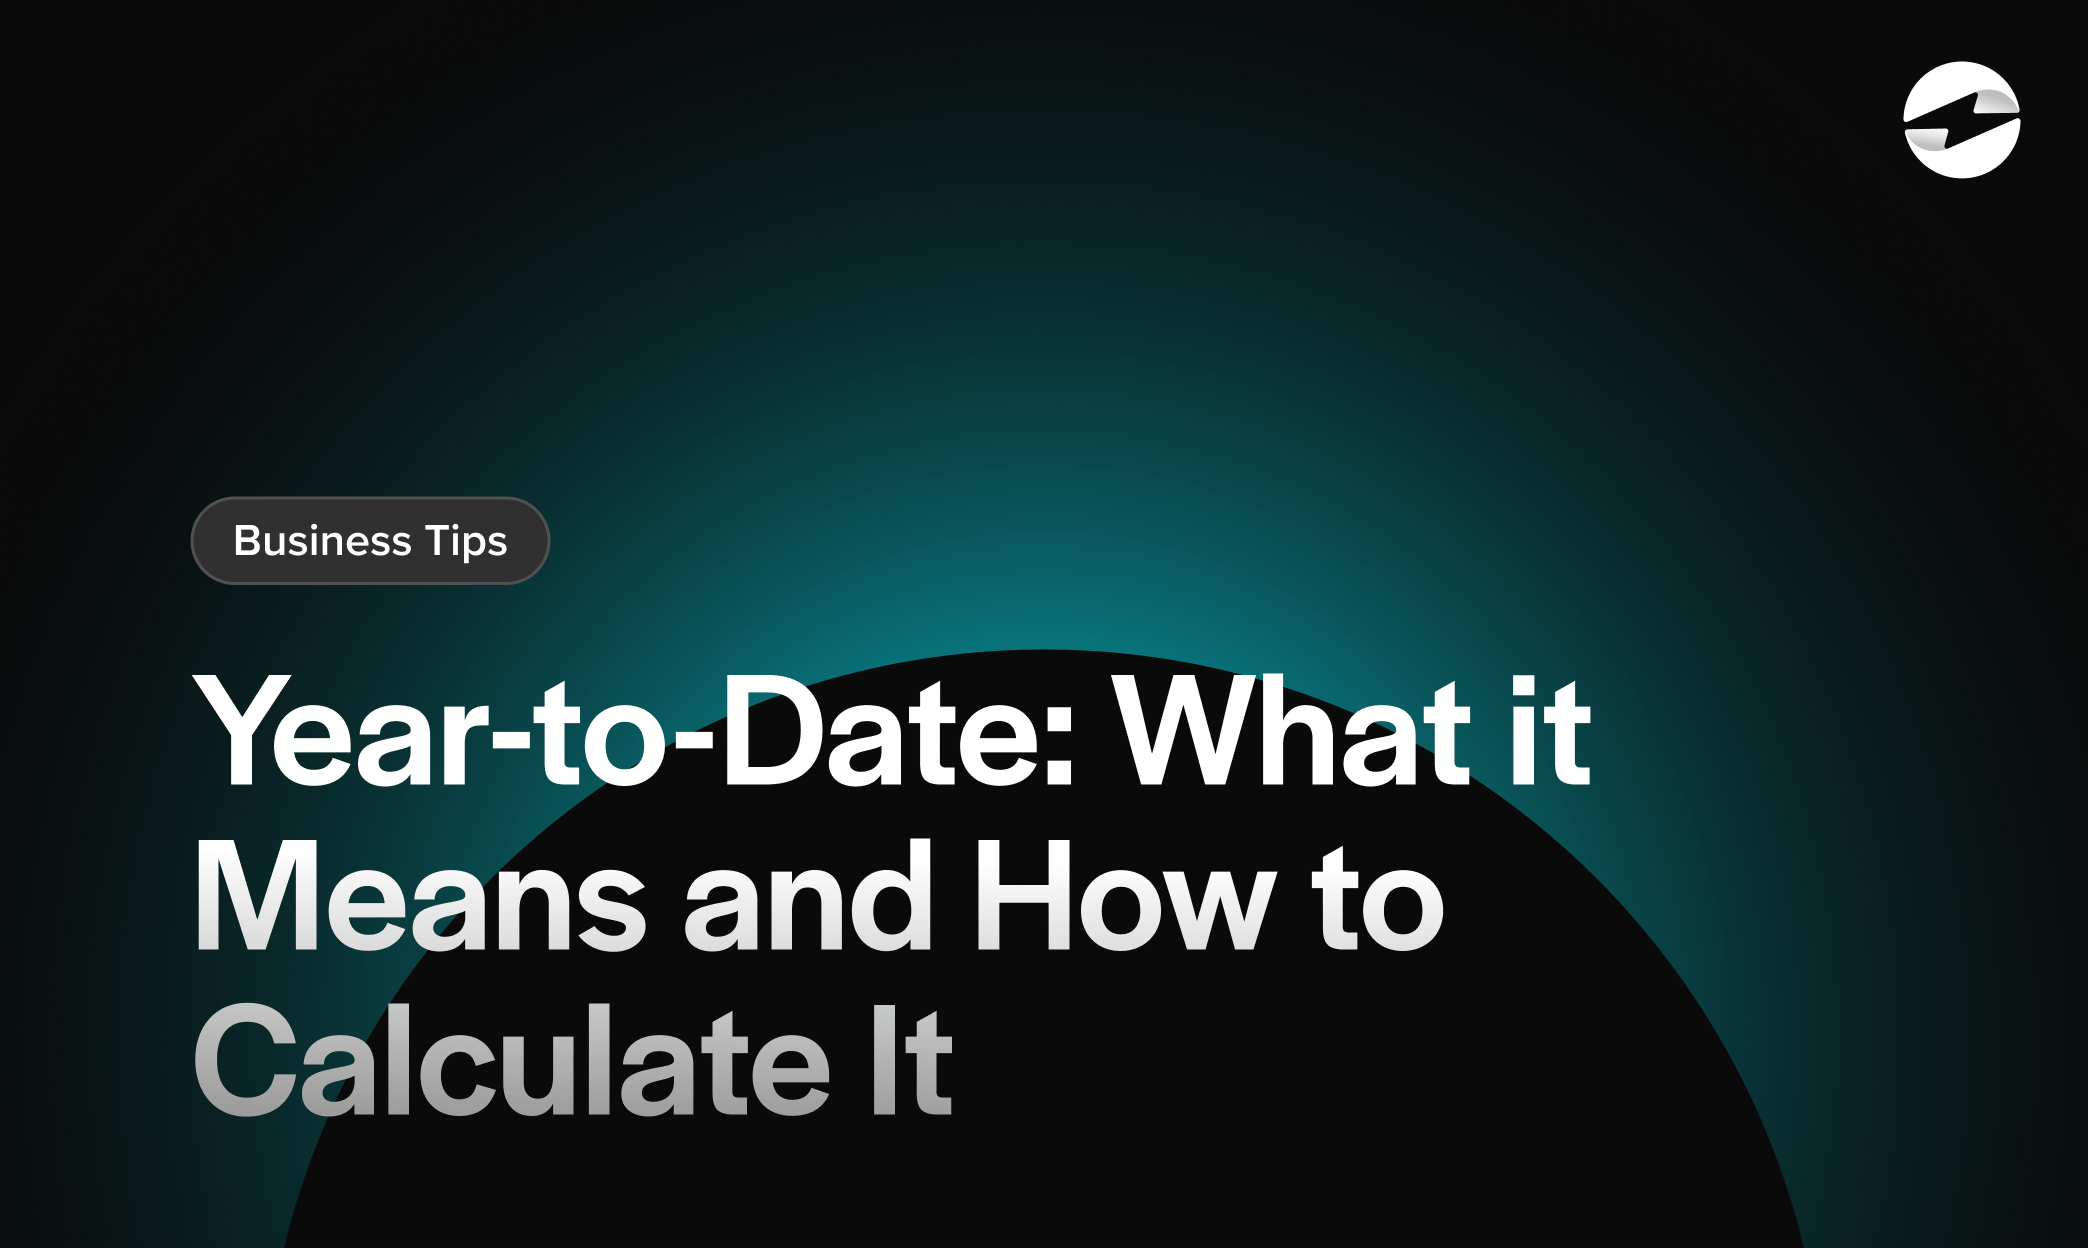 Year-to-Date: What it Means and How to Calculate It